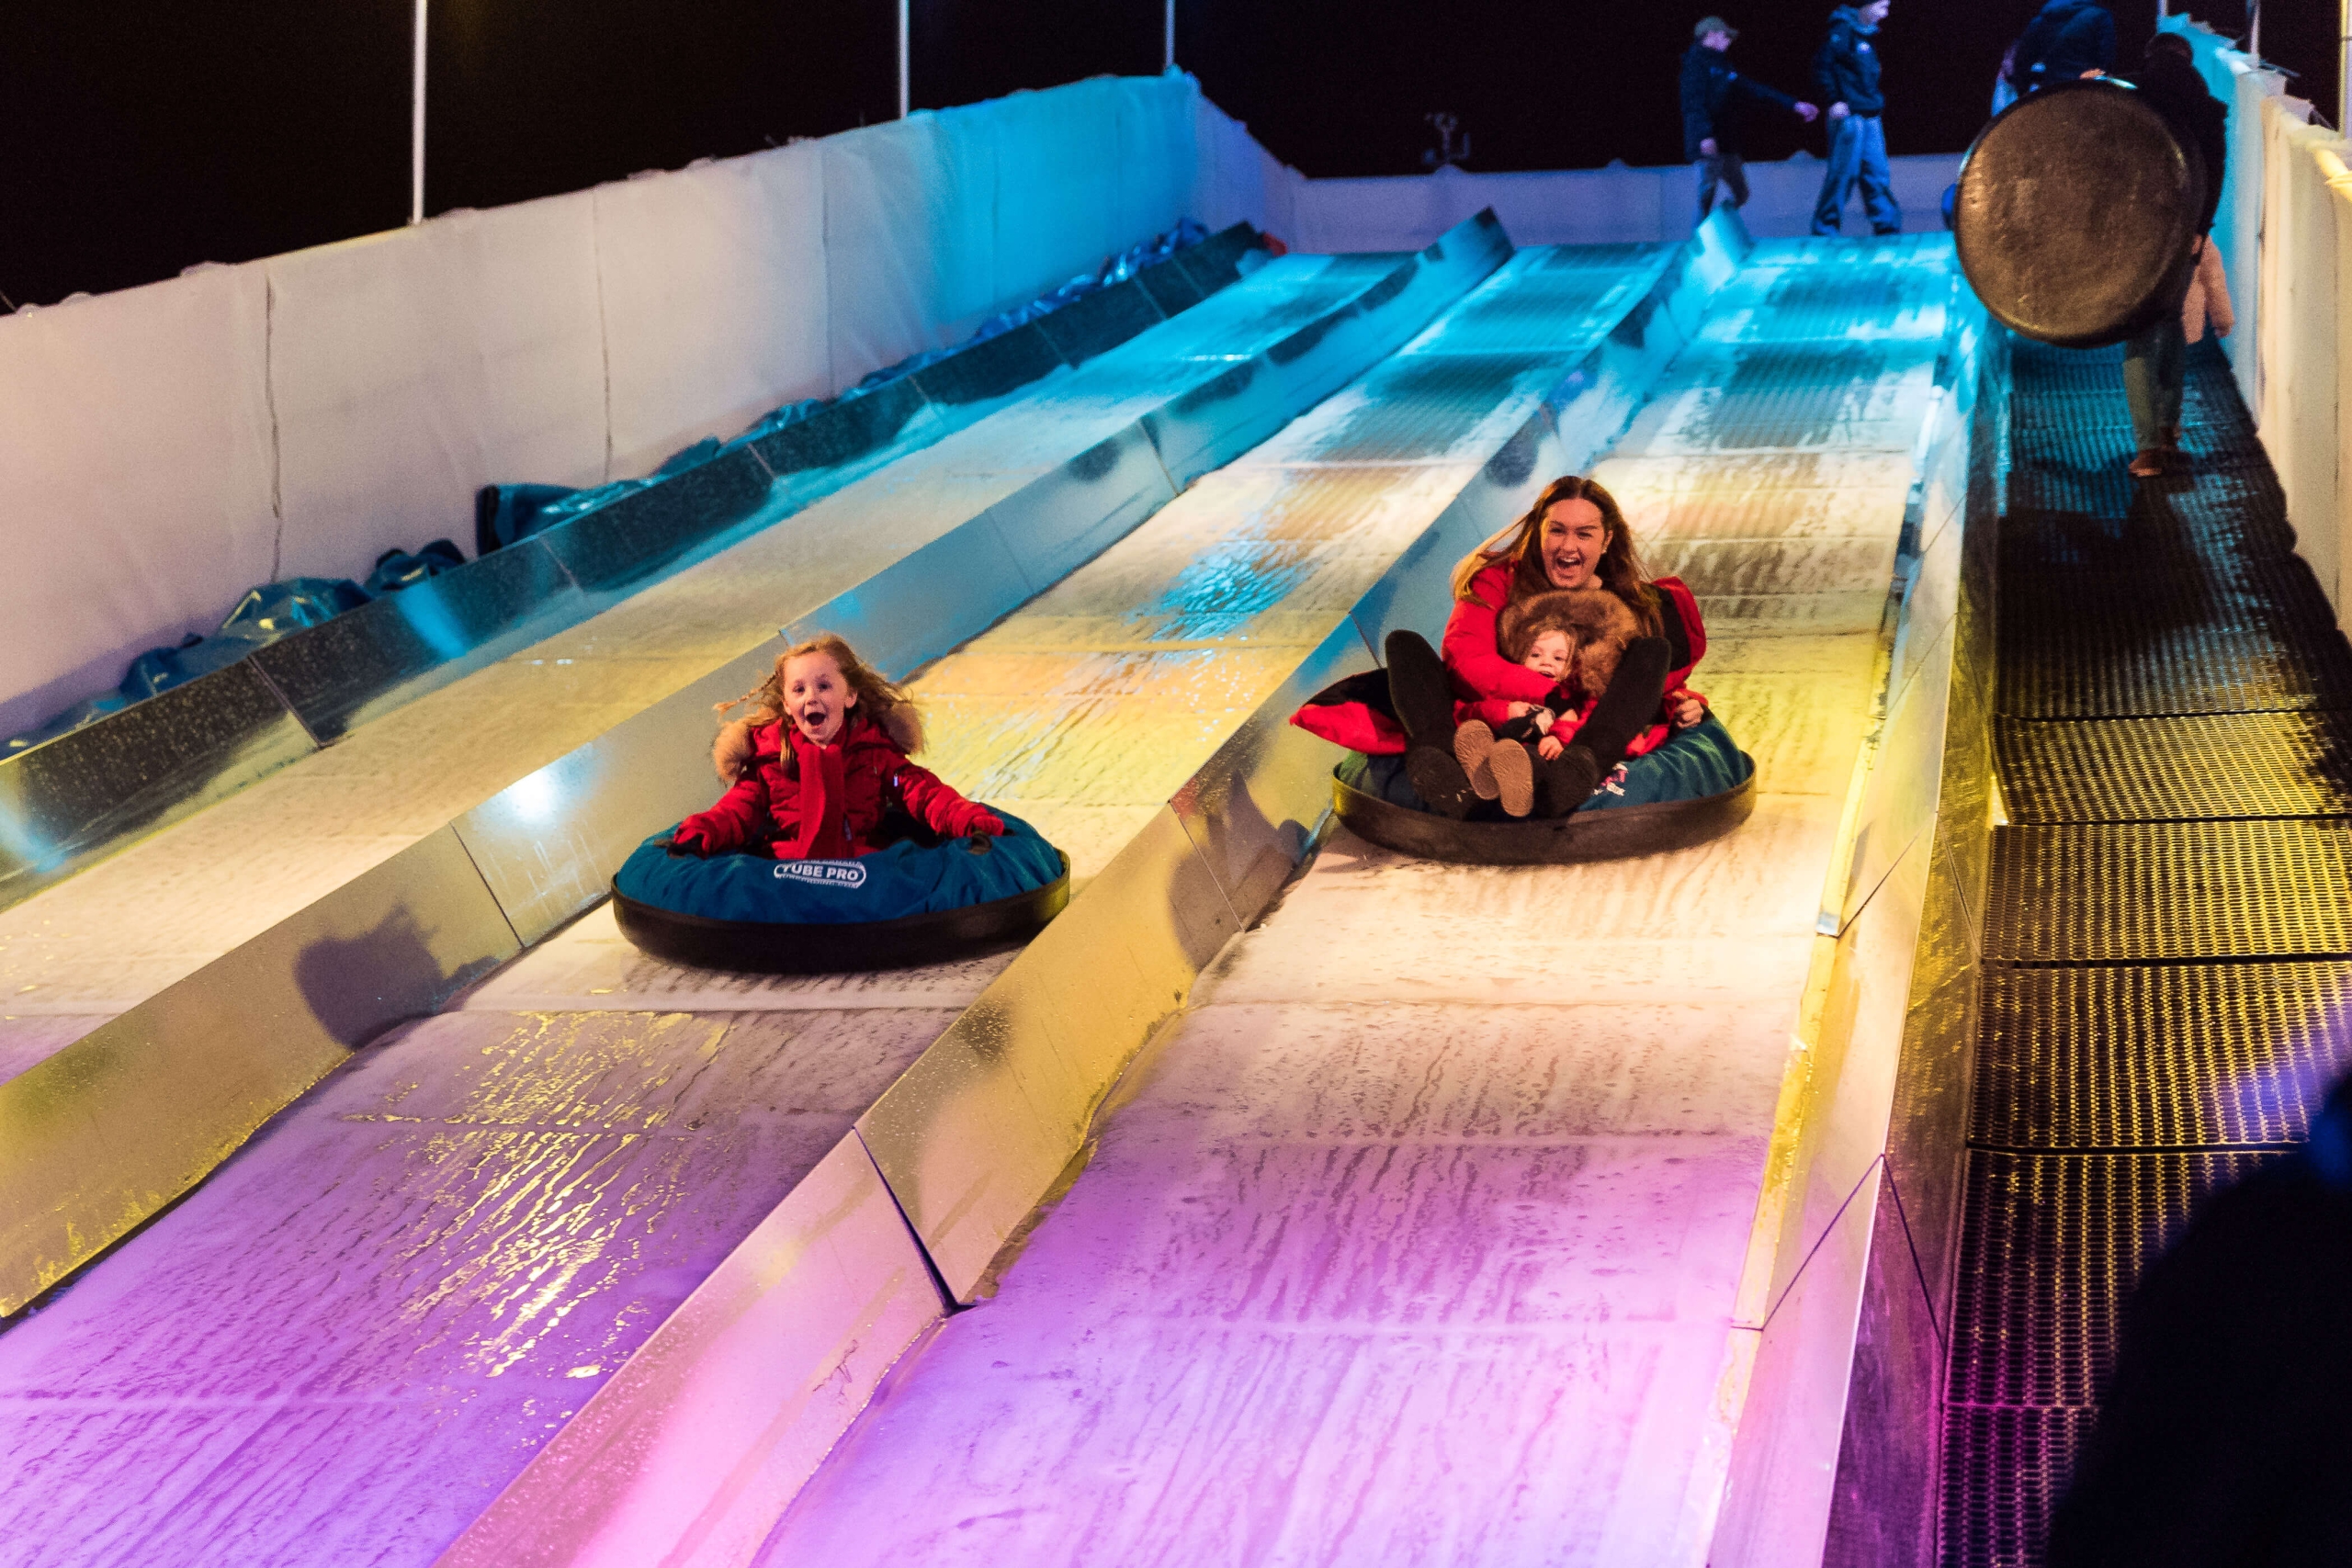 a lady and a young girl sliding down a slide with purple and blue lighting